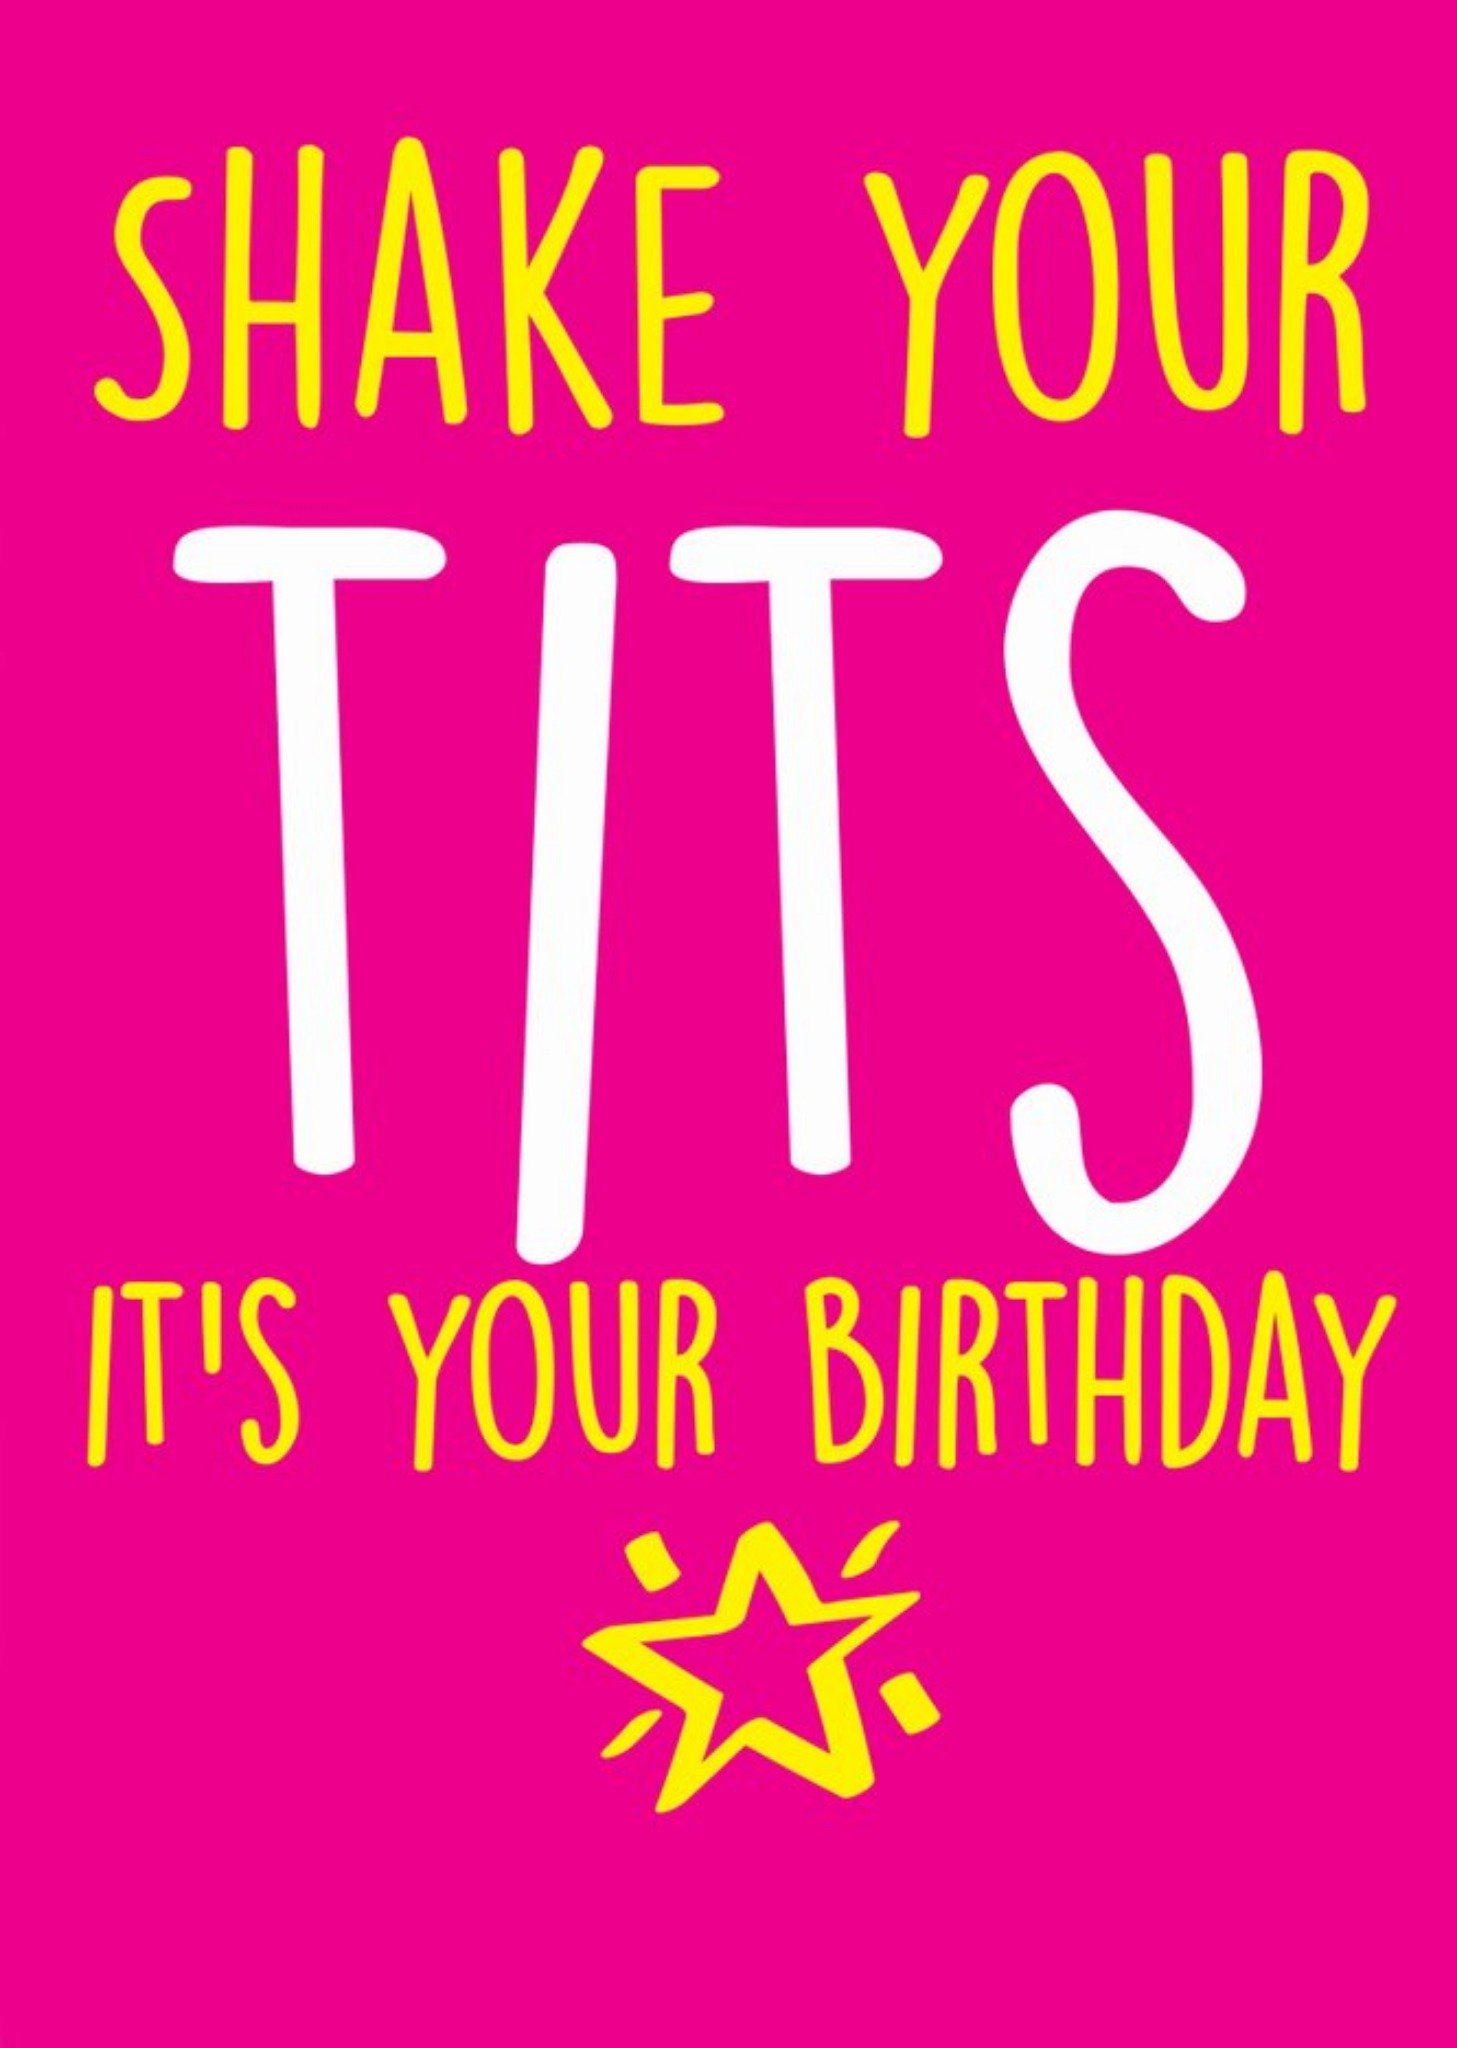 Moonpig Funny Cheeky Chops Shake Your Tits Its Your Birthday Card Ecard